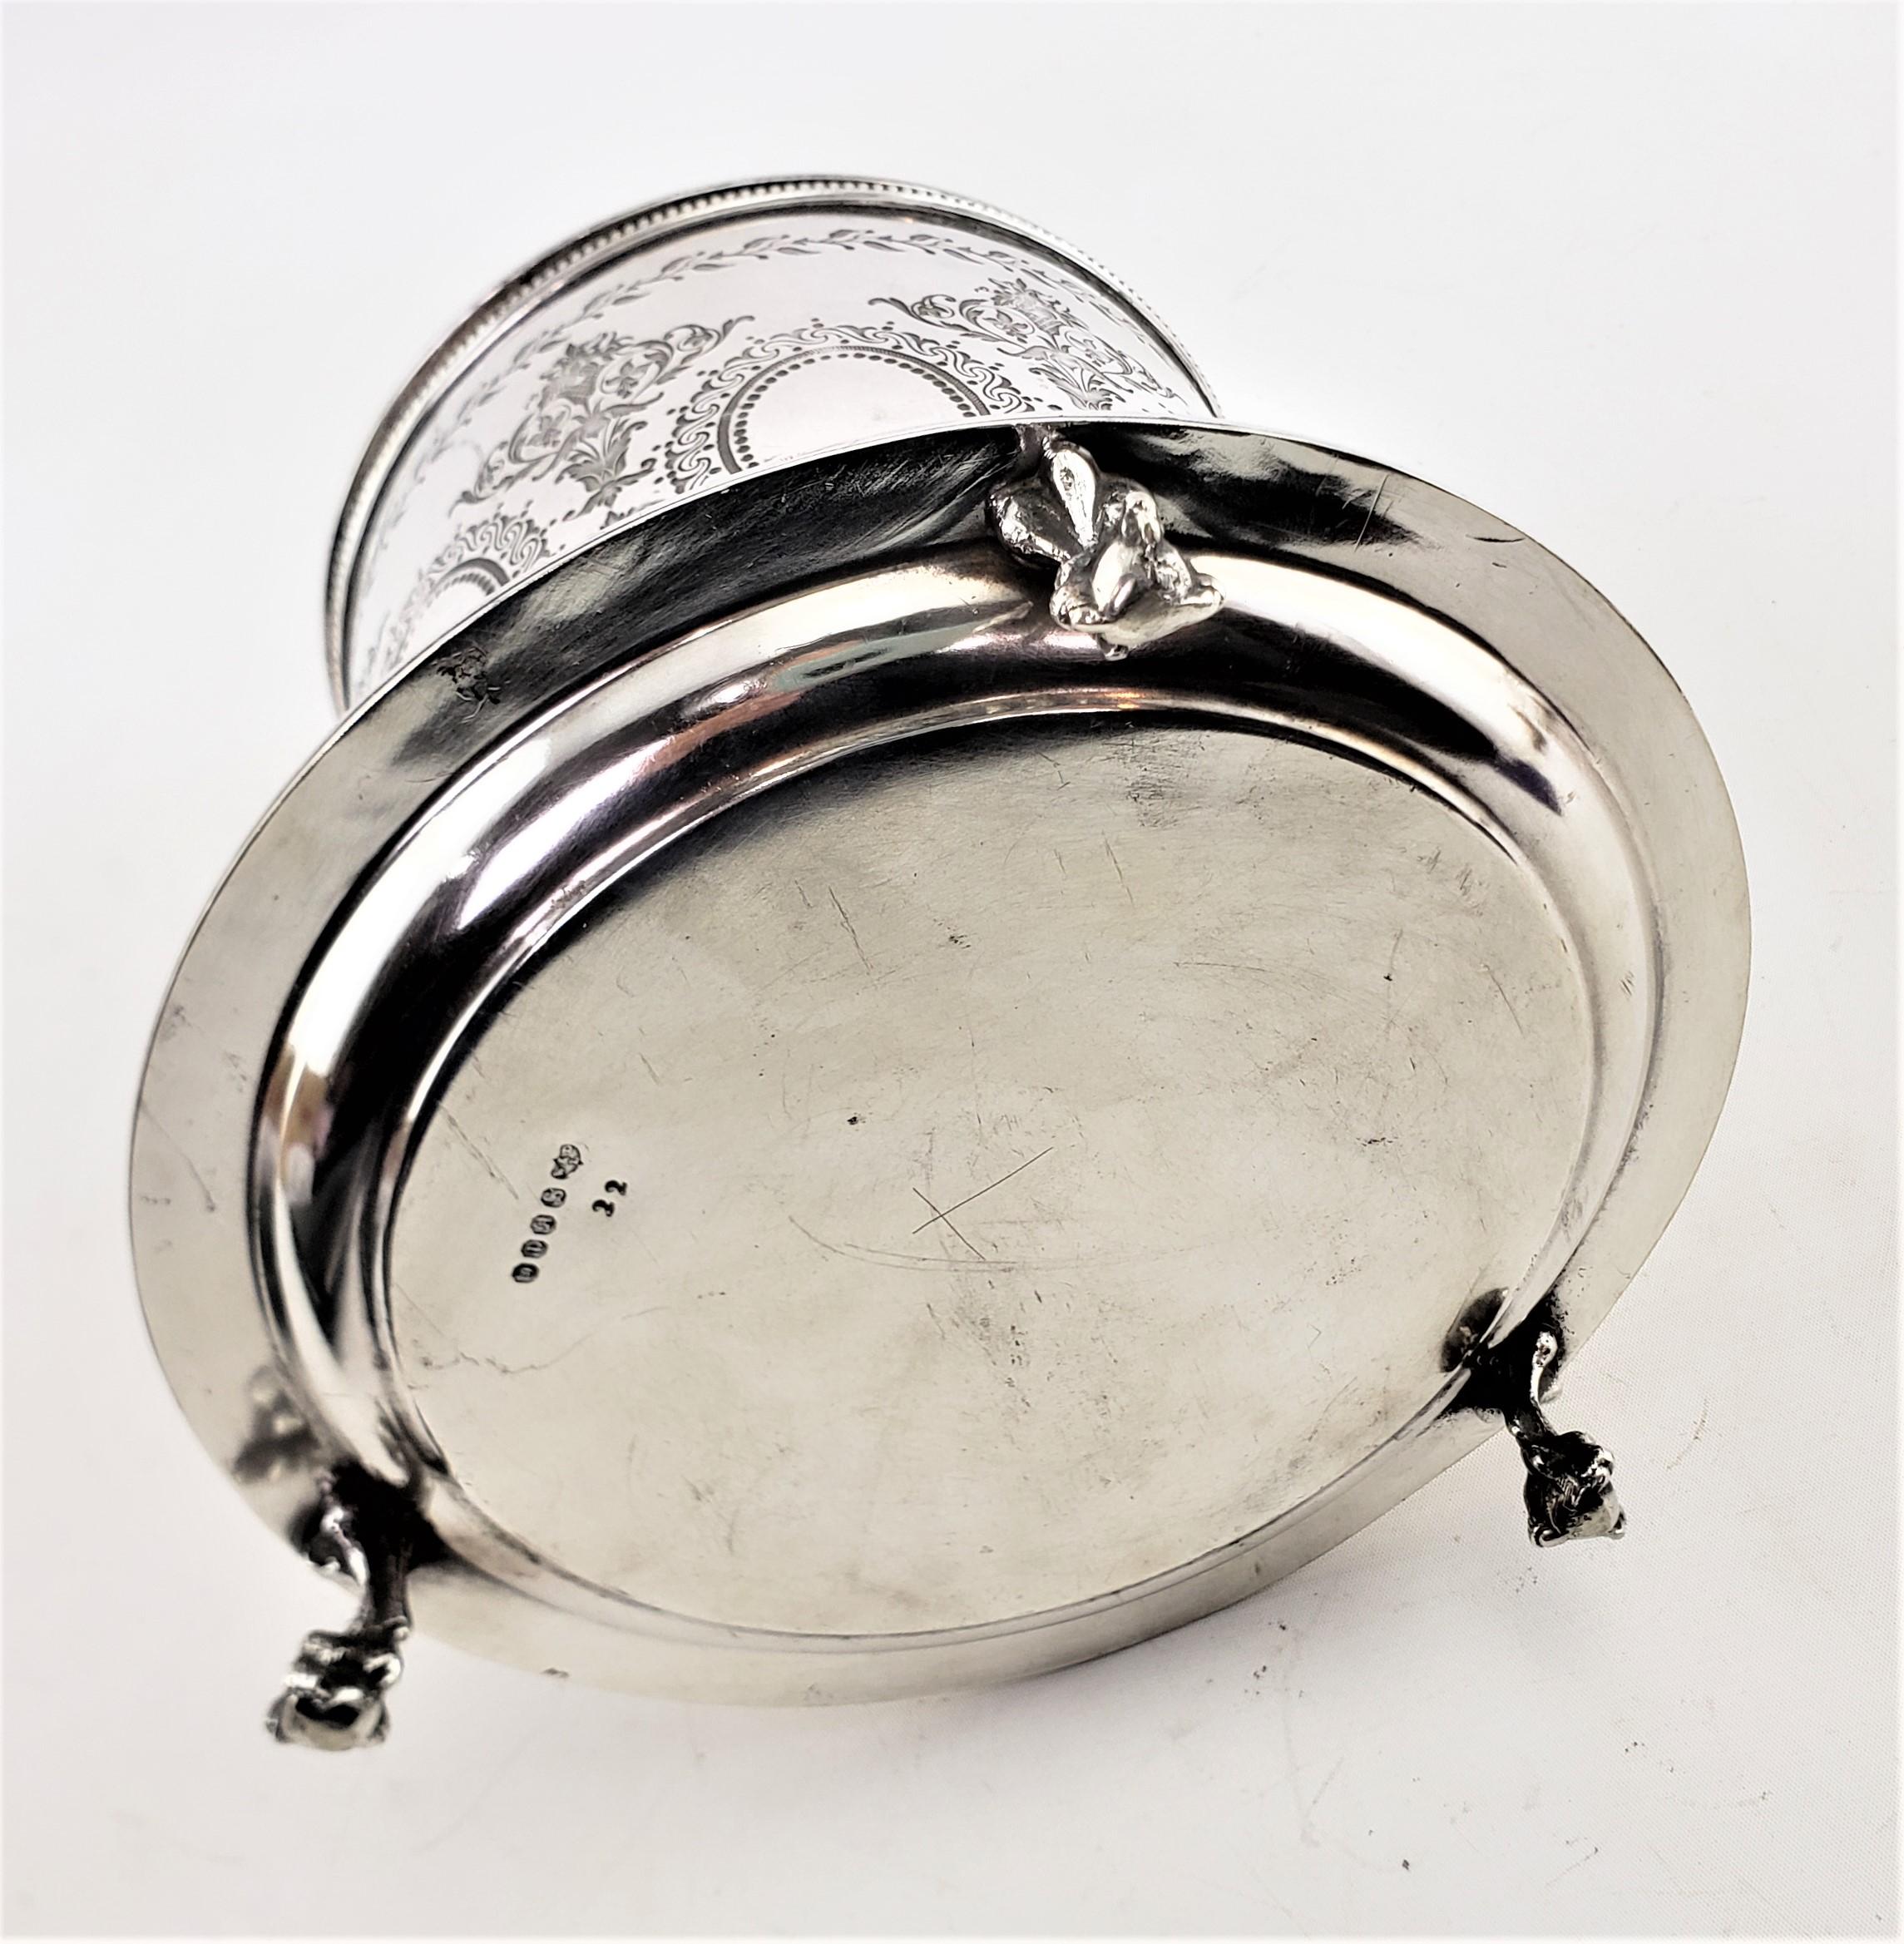 Antique English Silver Plated Oval Biscuit Barrel with Elaborate Engraving For Sale 3